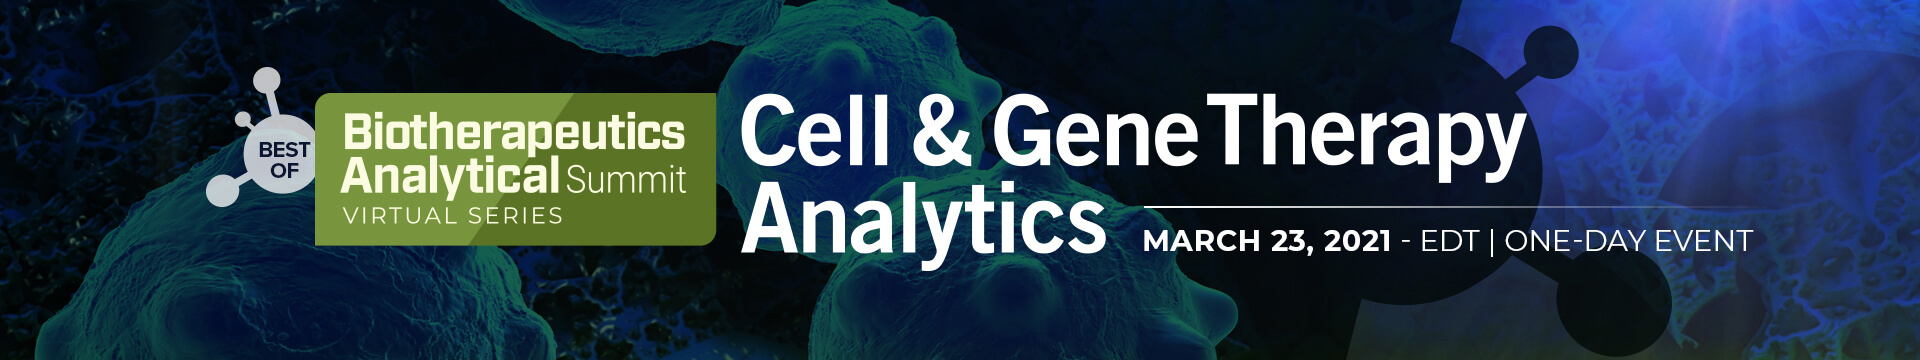 Cell & Gene Therapy Analytics Banner Image